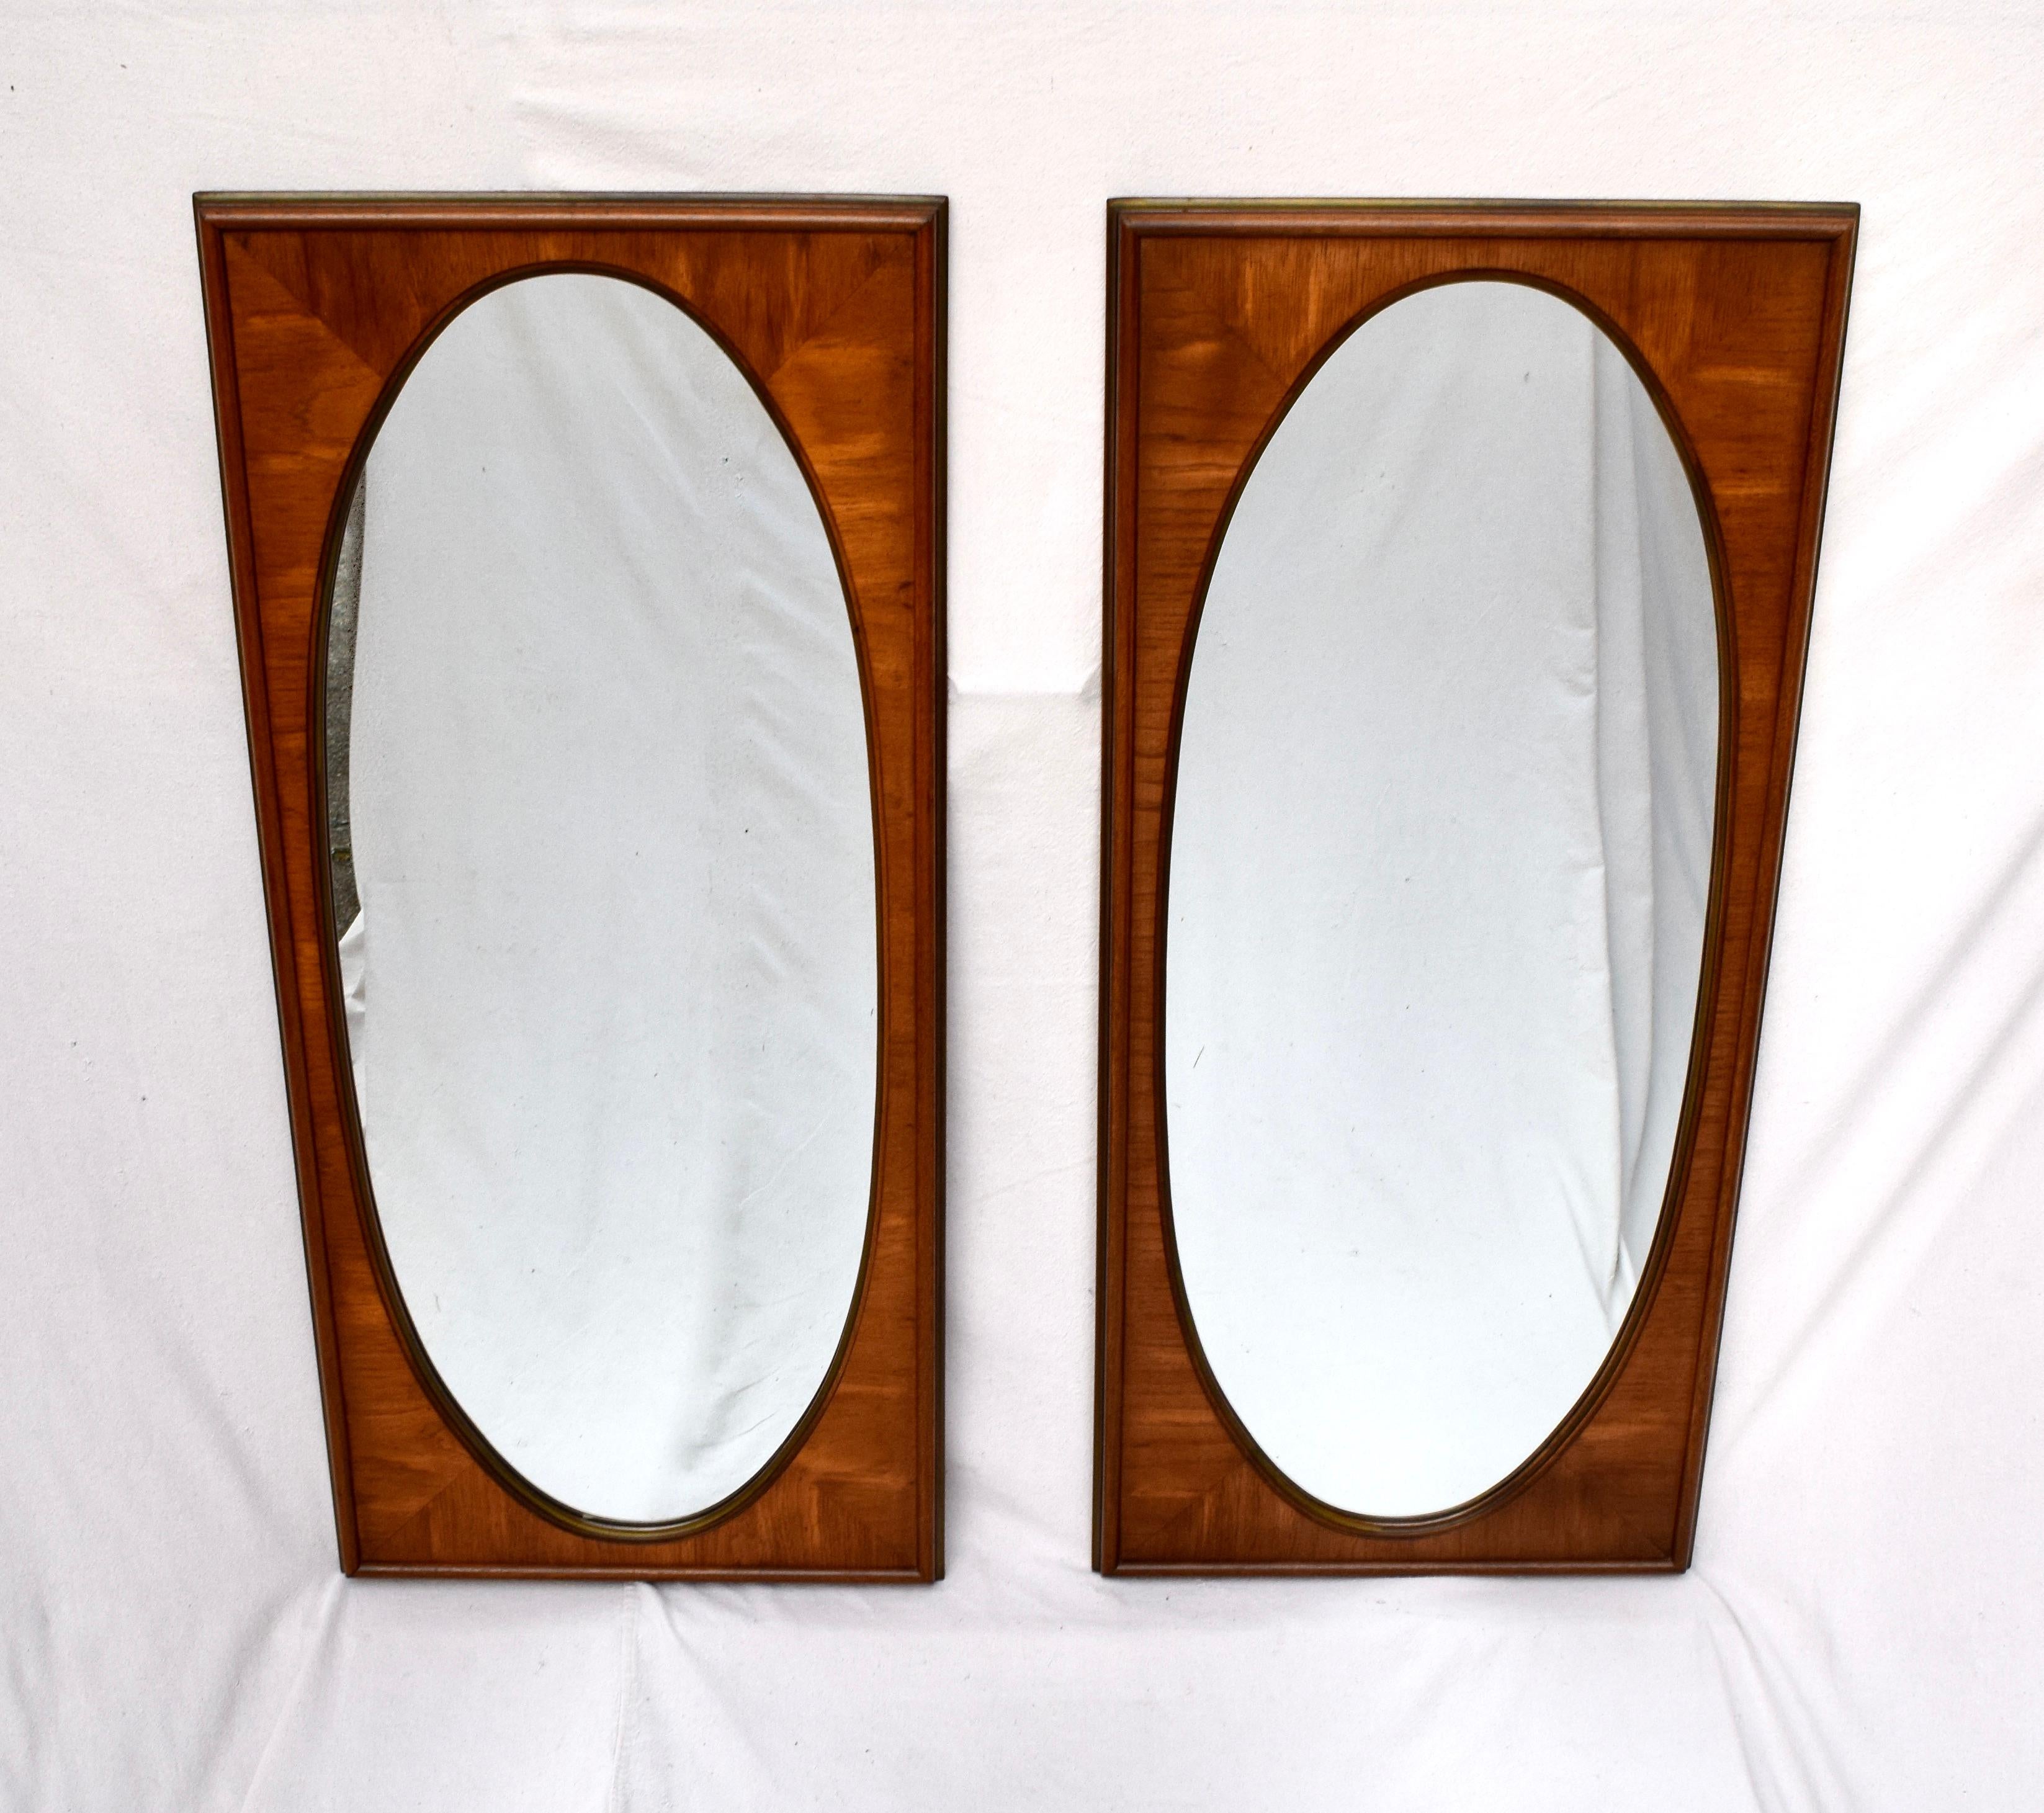 A set of early 1950s mirrors by White Furniture Company of Mebane, NC. Impressive book matched walnut veneers & interesting oval forms within the rectangle frames offer versatile design elements suitable for placement options from Classical to